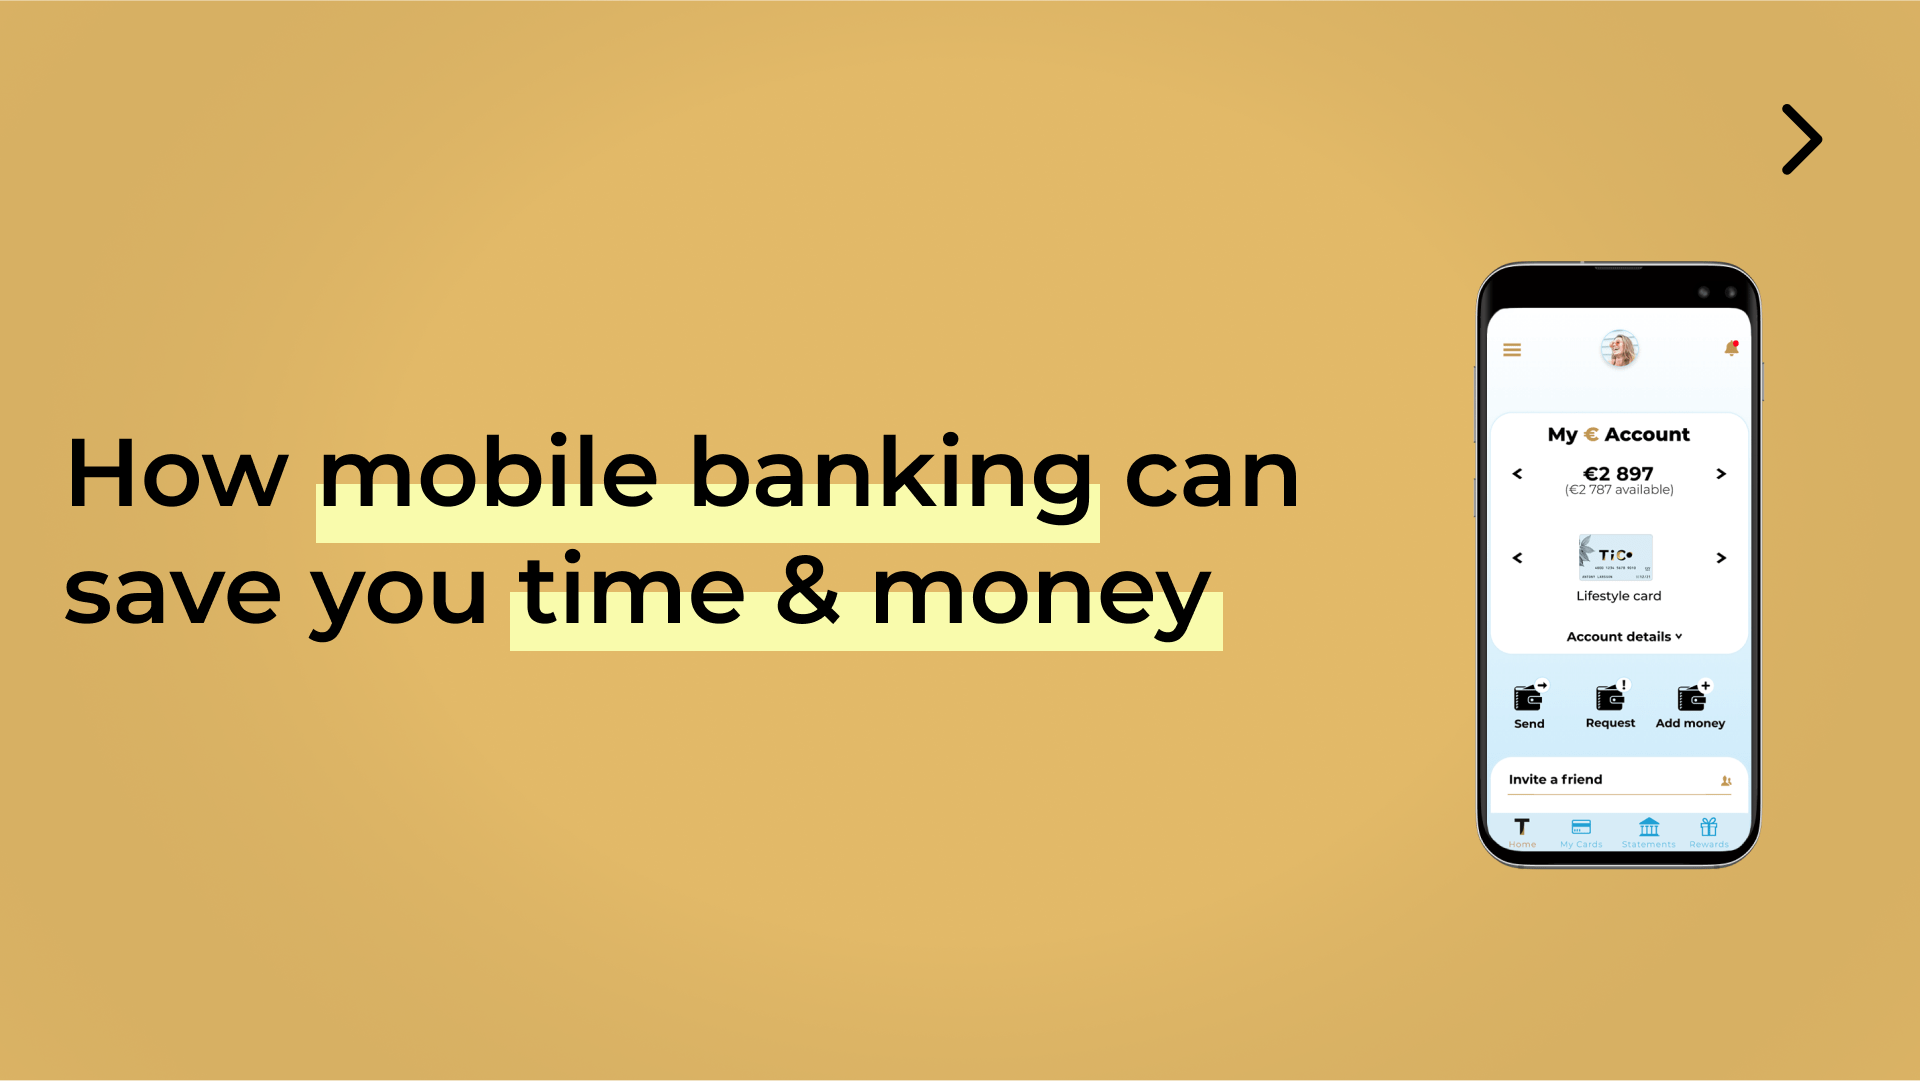 How mobile banking can save you time & money